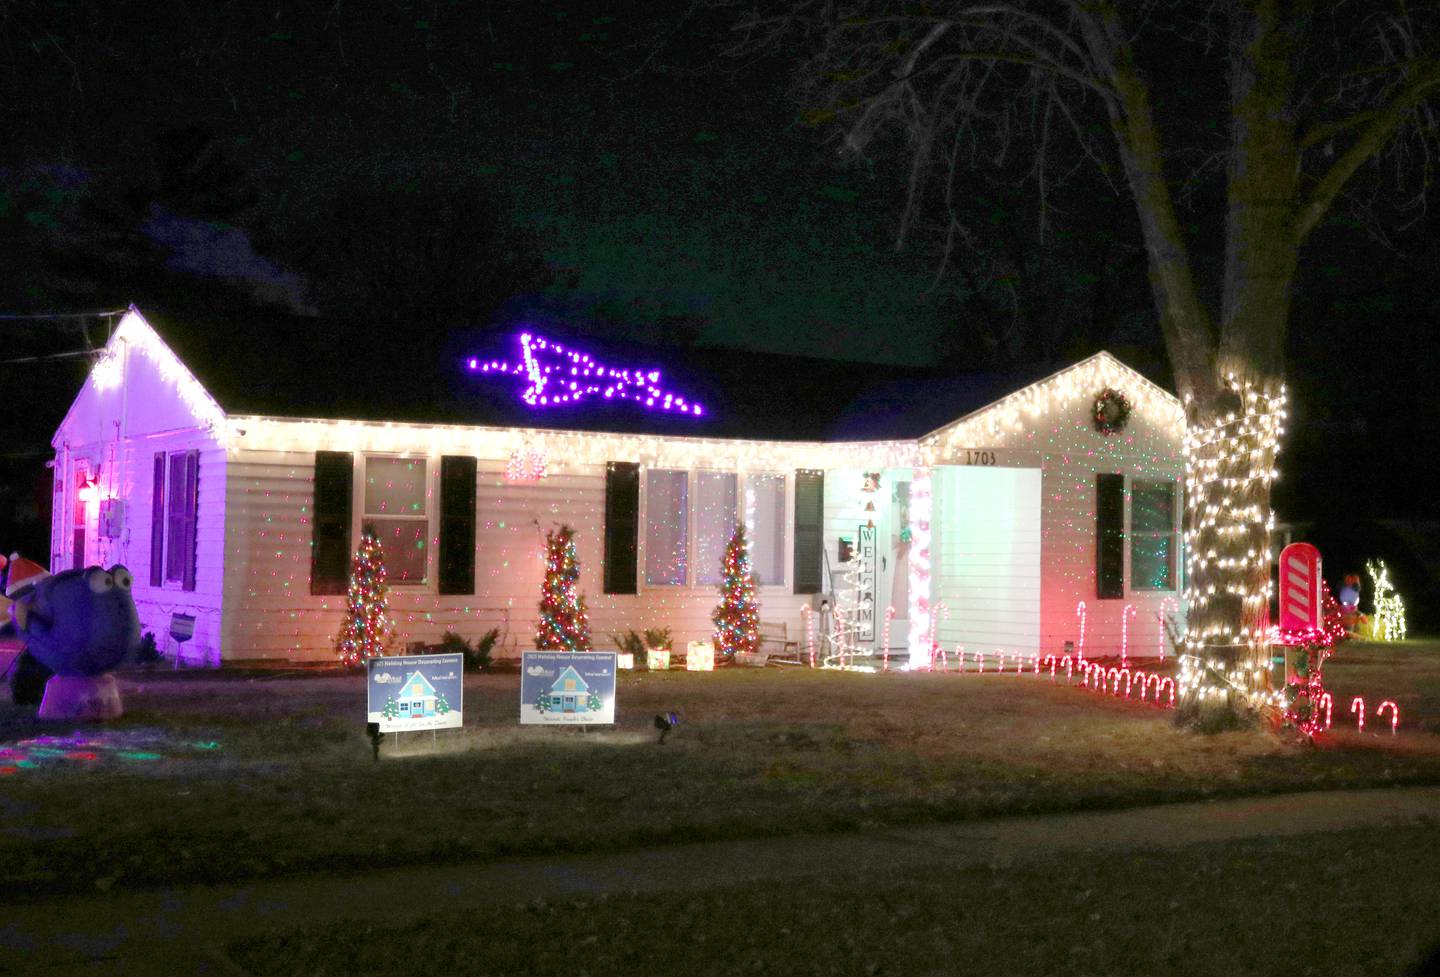 Many homes in DeKalb County were all decked out for the holidays like this one at 1703 Clark Street in DeKalb which was one of the award winners in the DeKalb Park District's Holiday House Decorating Contest.